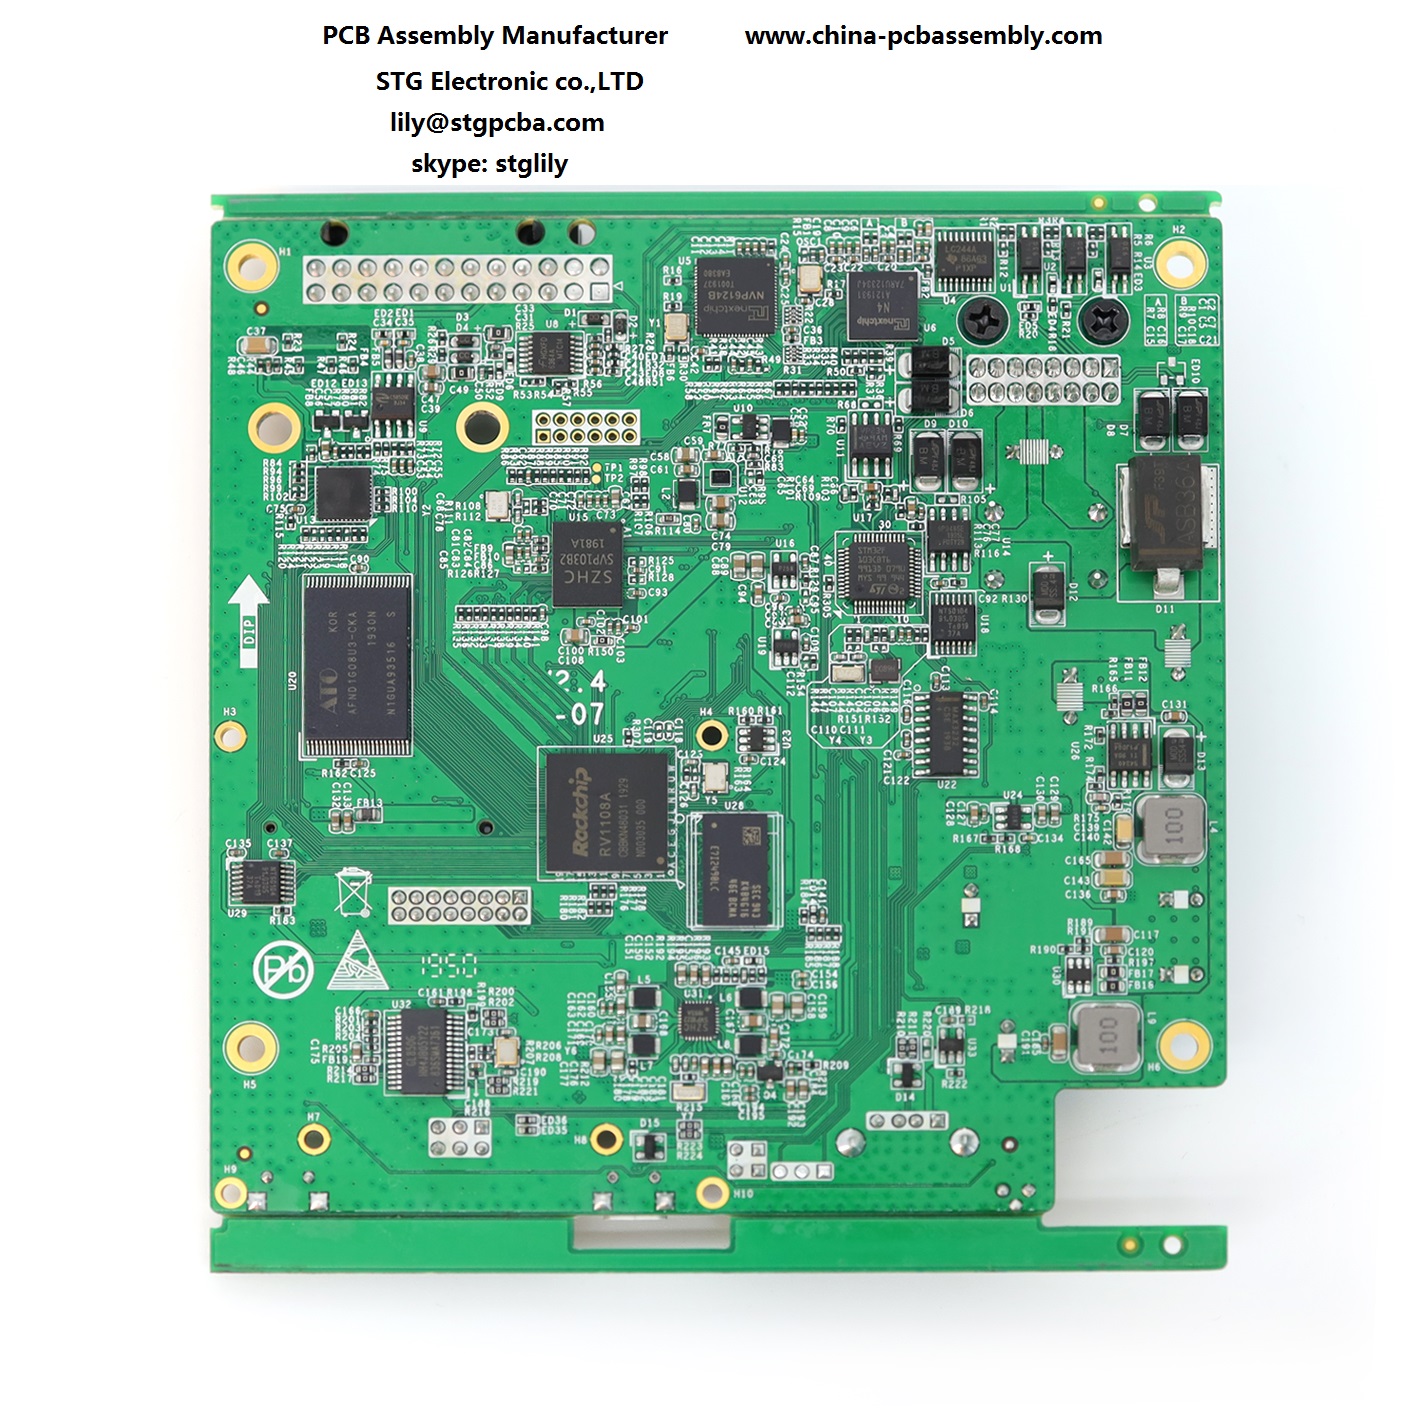 PCBA contract manPCBA contract manufacturing for control boards,factory in shenzhen,China ufacturing for control boards,factory in shenzhen,China 